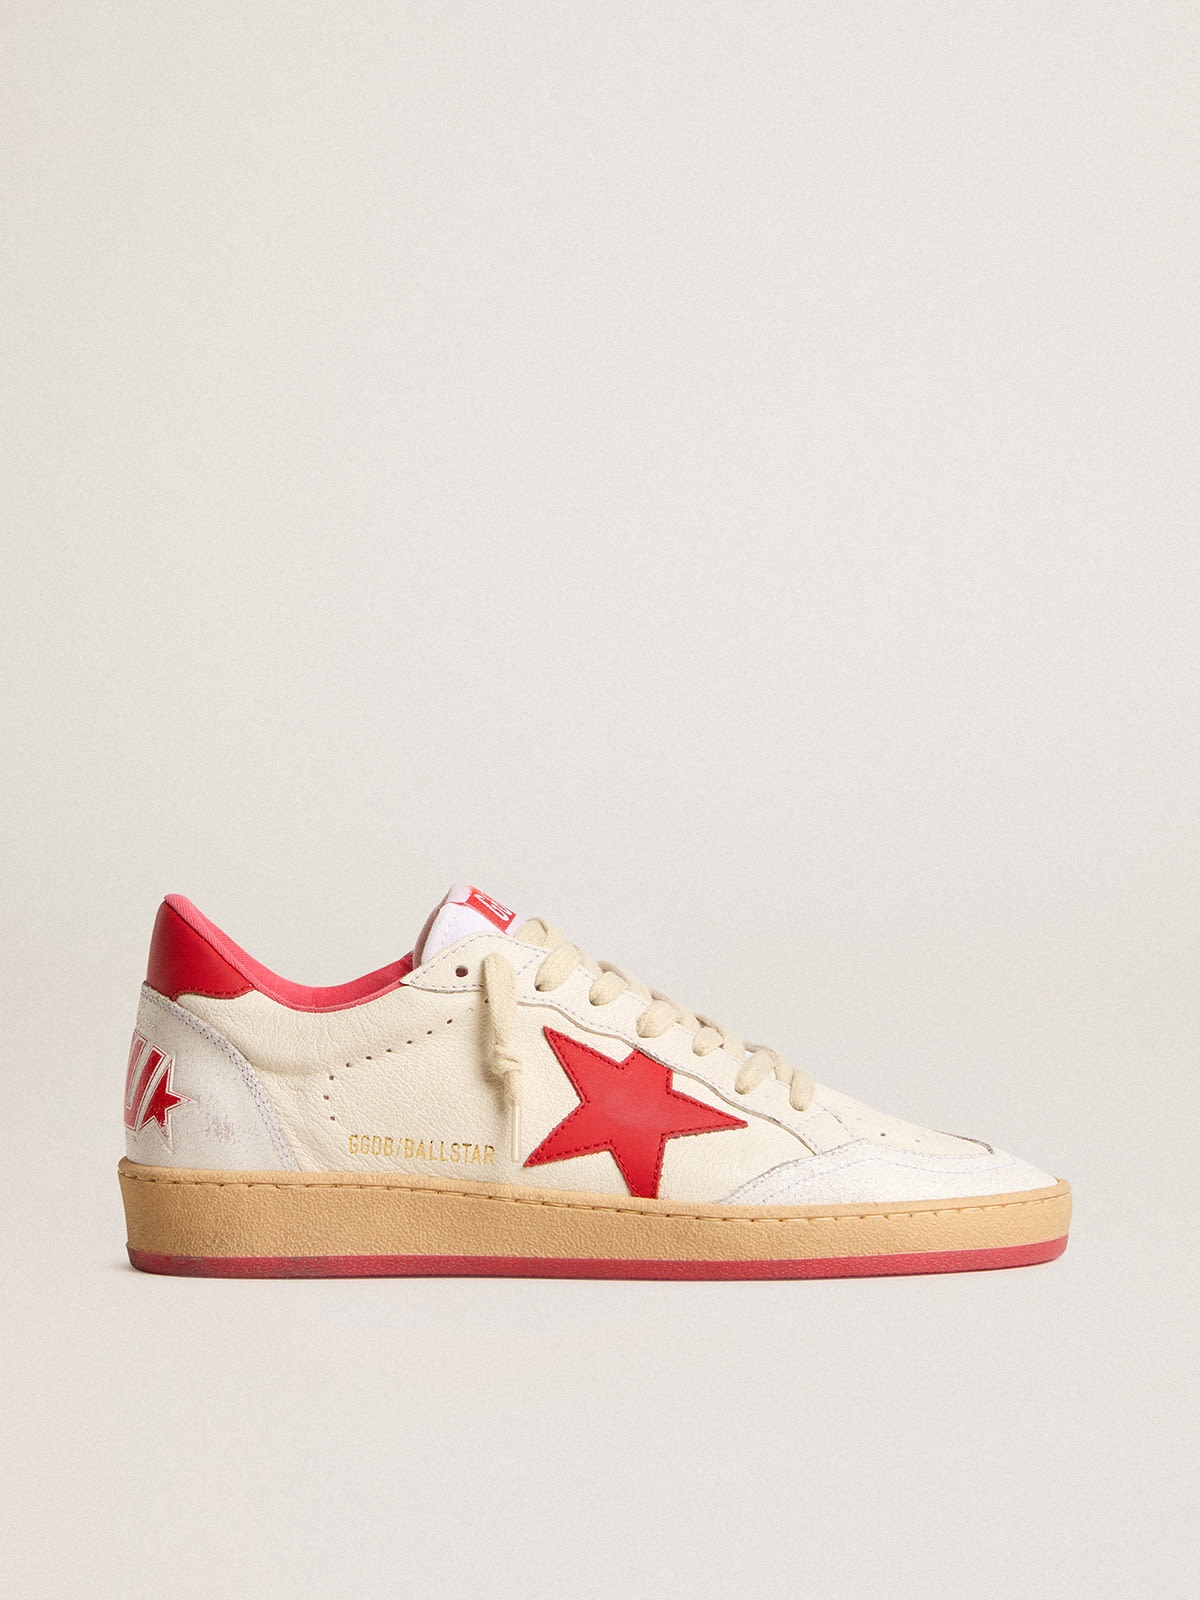 Men’s Ball Star  Wishes in white leather with a red star and heel tab - 1